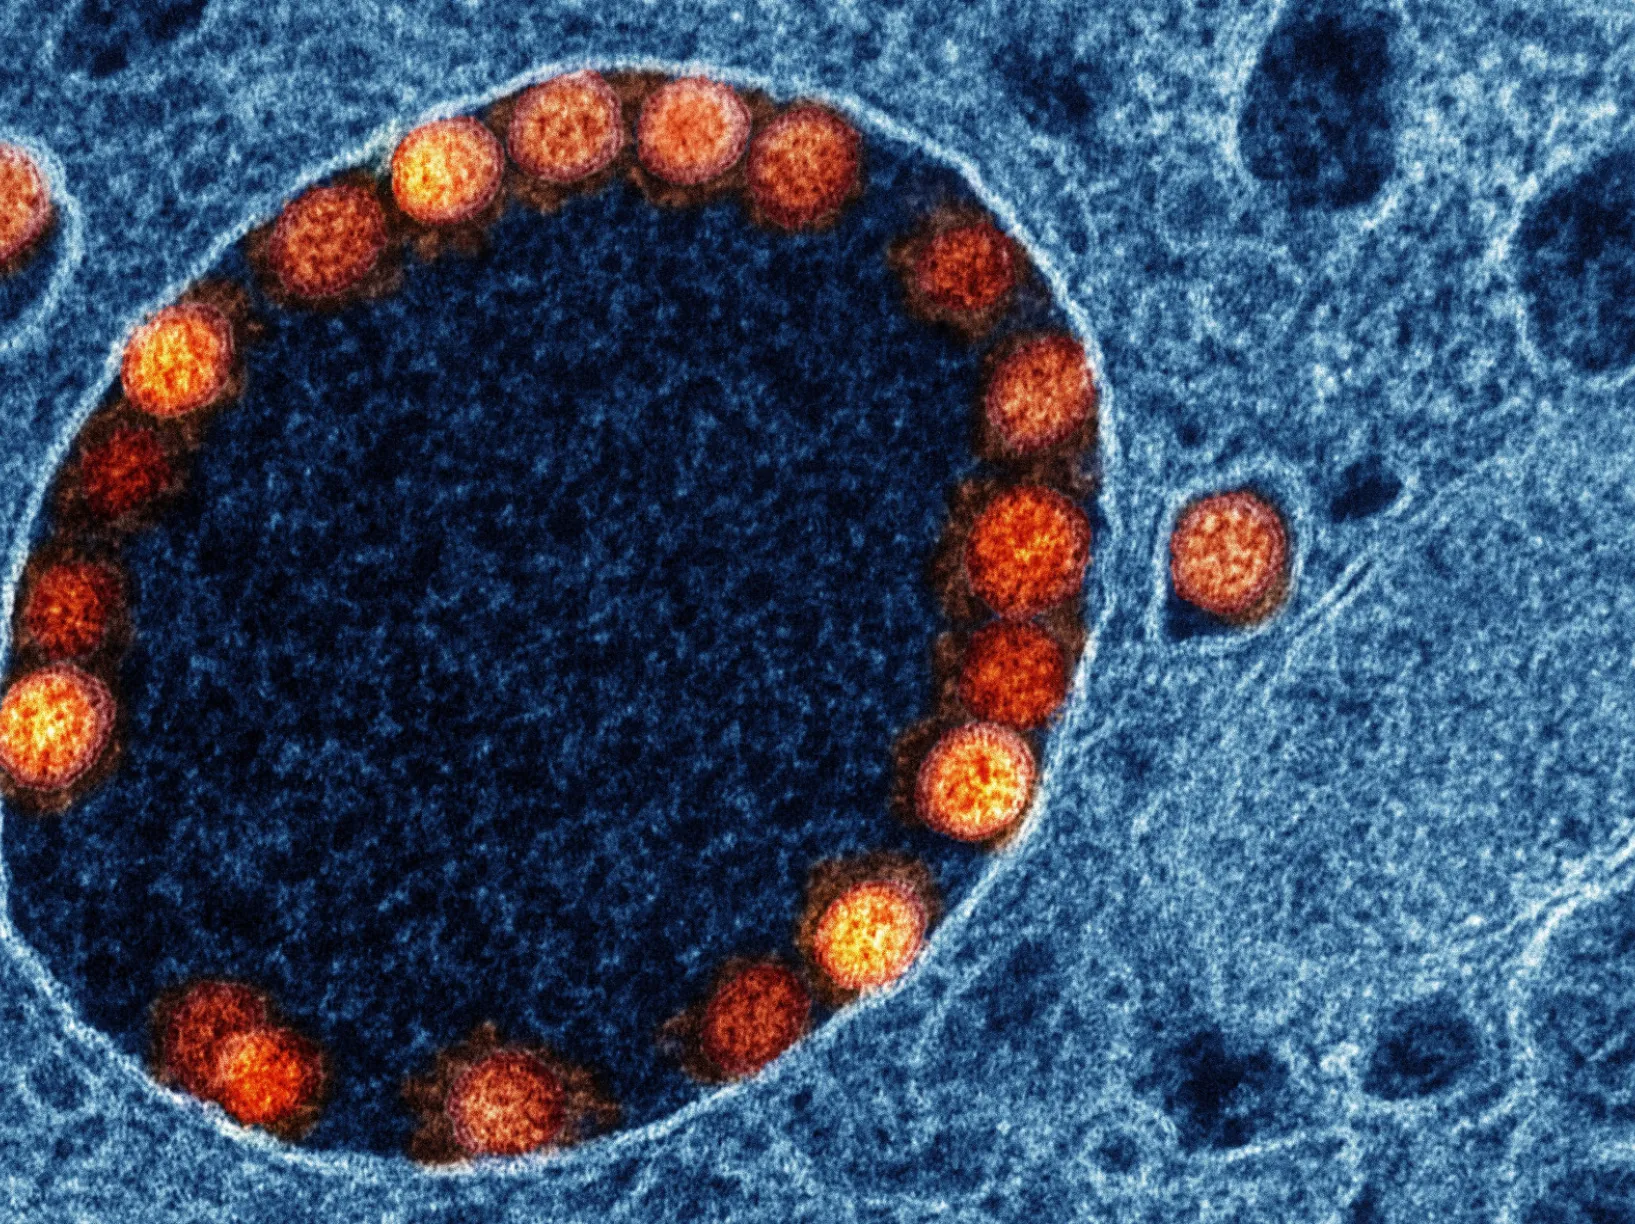 Researchers will conduct studies in mice and human cell samples – including epithelial cells, the type of cell infected by SARS-CoV-2 in this image. Transmission electron micrograph image: NIAID